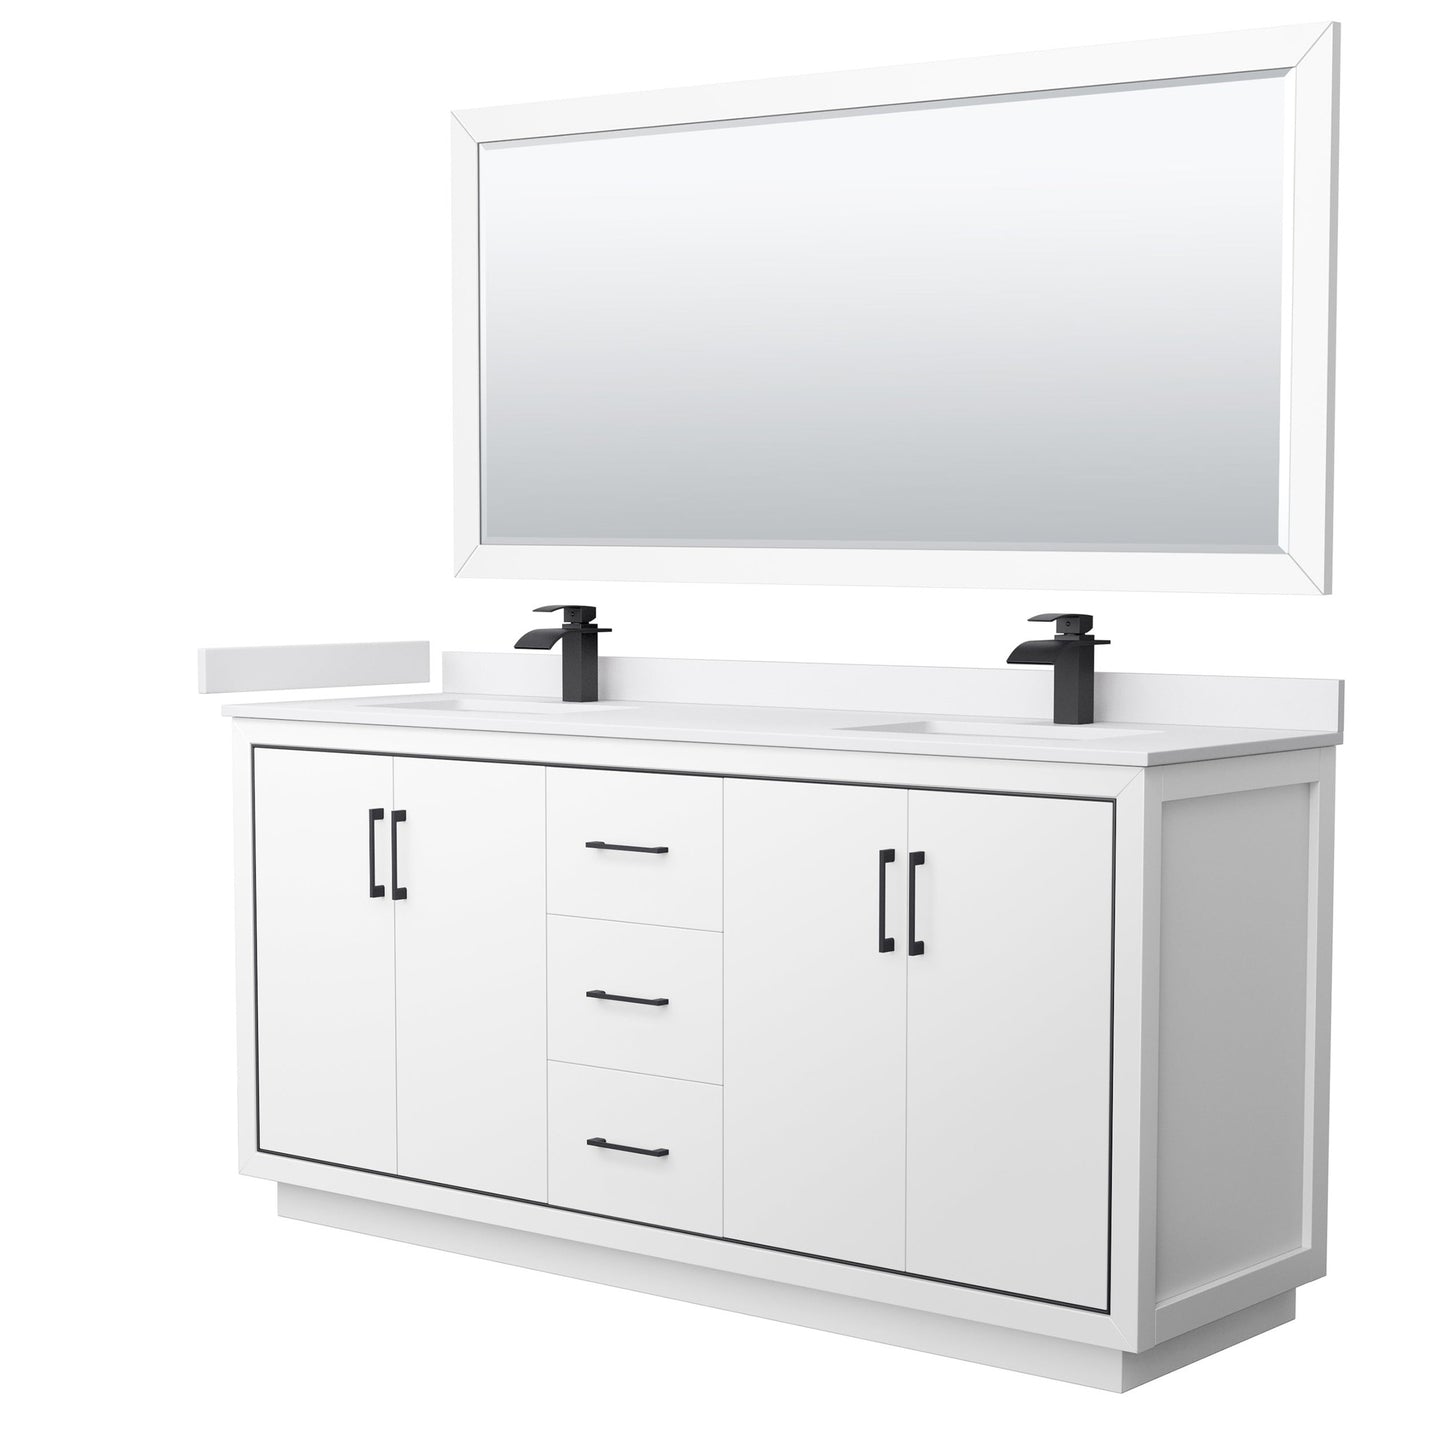 Wyndham Collection Icon 72" Double Bathroom Vanity in White, White Cultured Marble Countertop, Undermount Square Sinks, Matte Black Trim, 70" Mirror